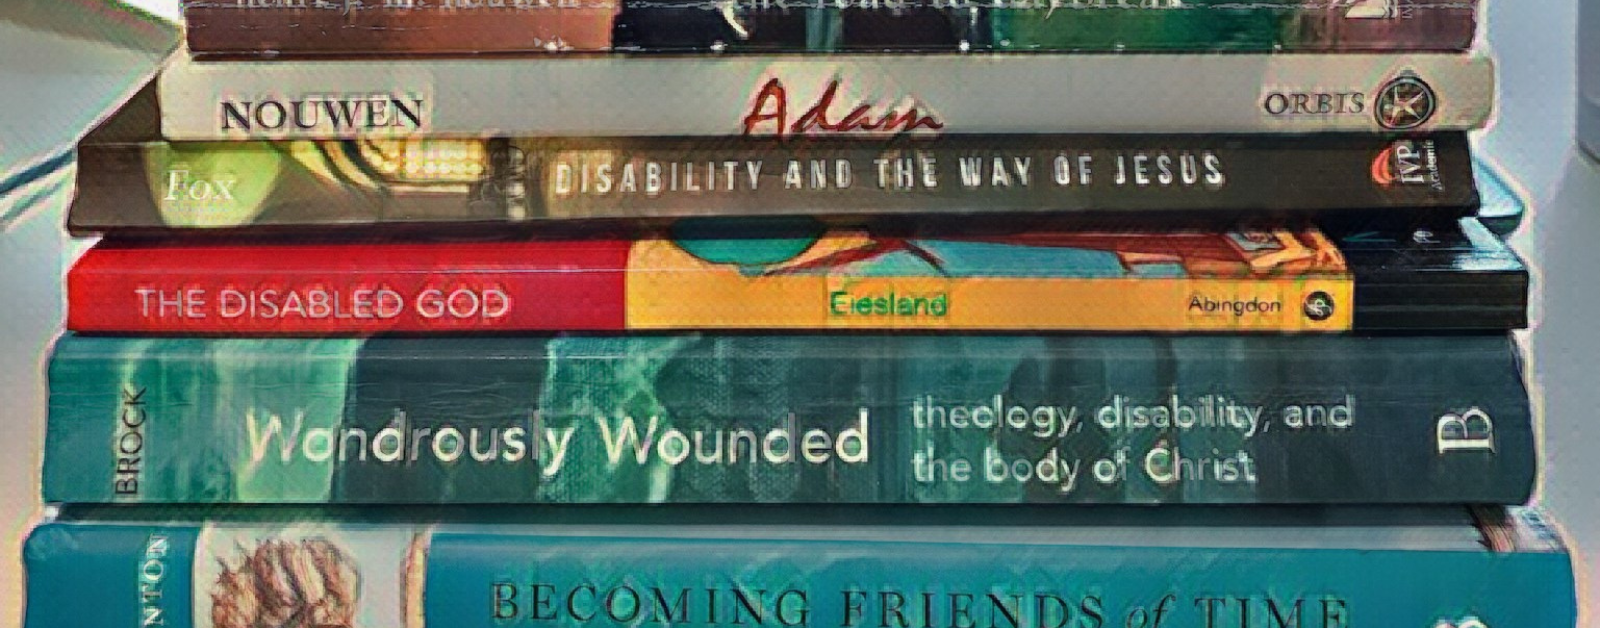 painted filter over a photo of a stack of books about disability